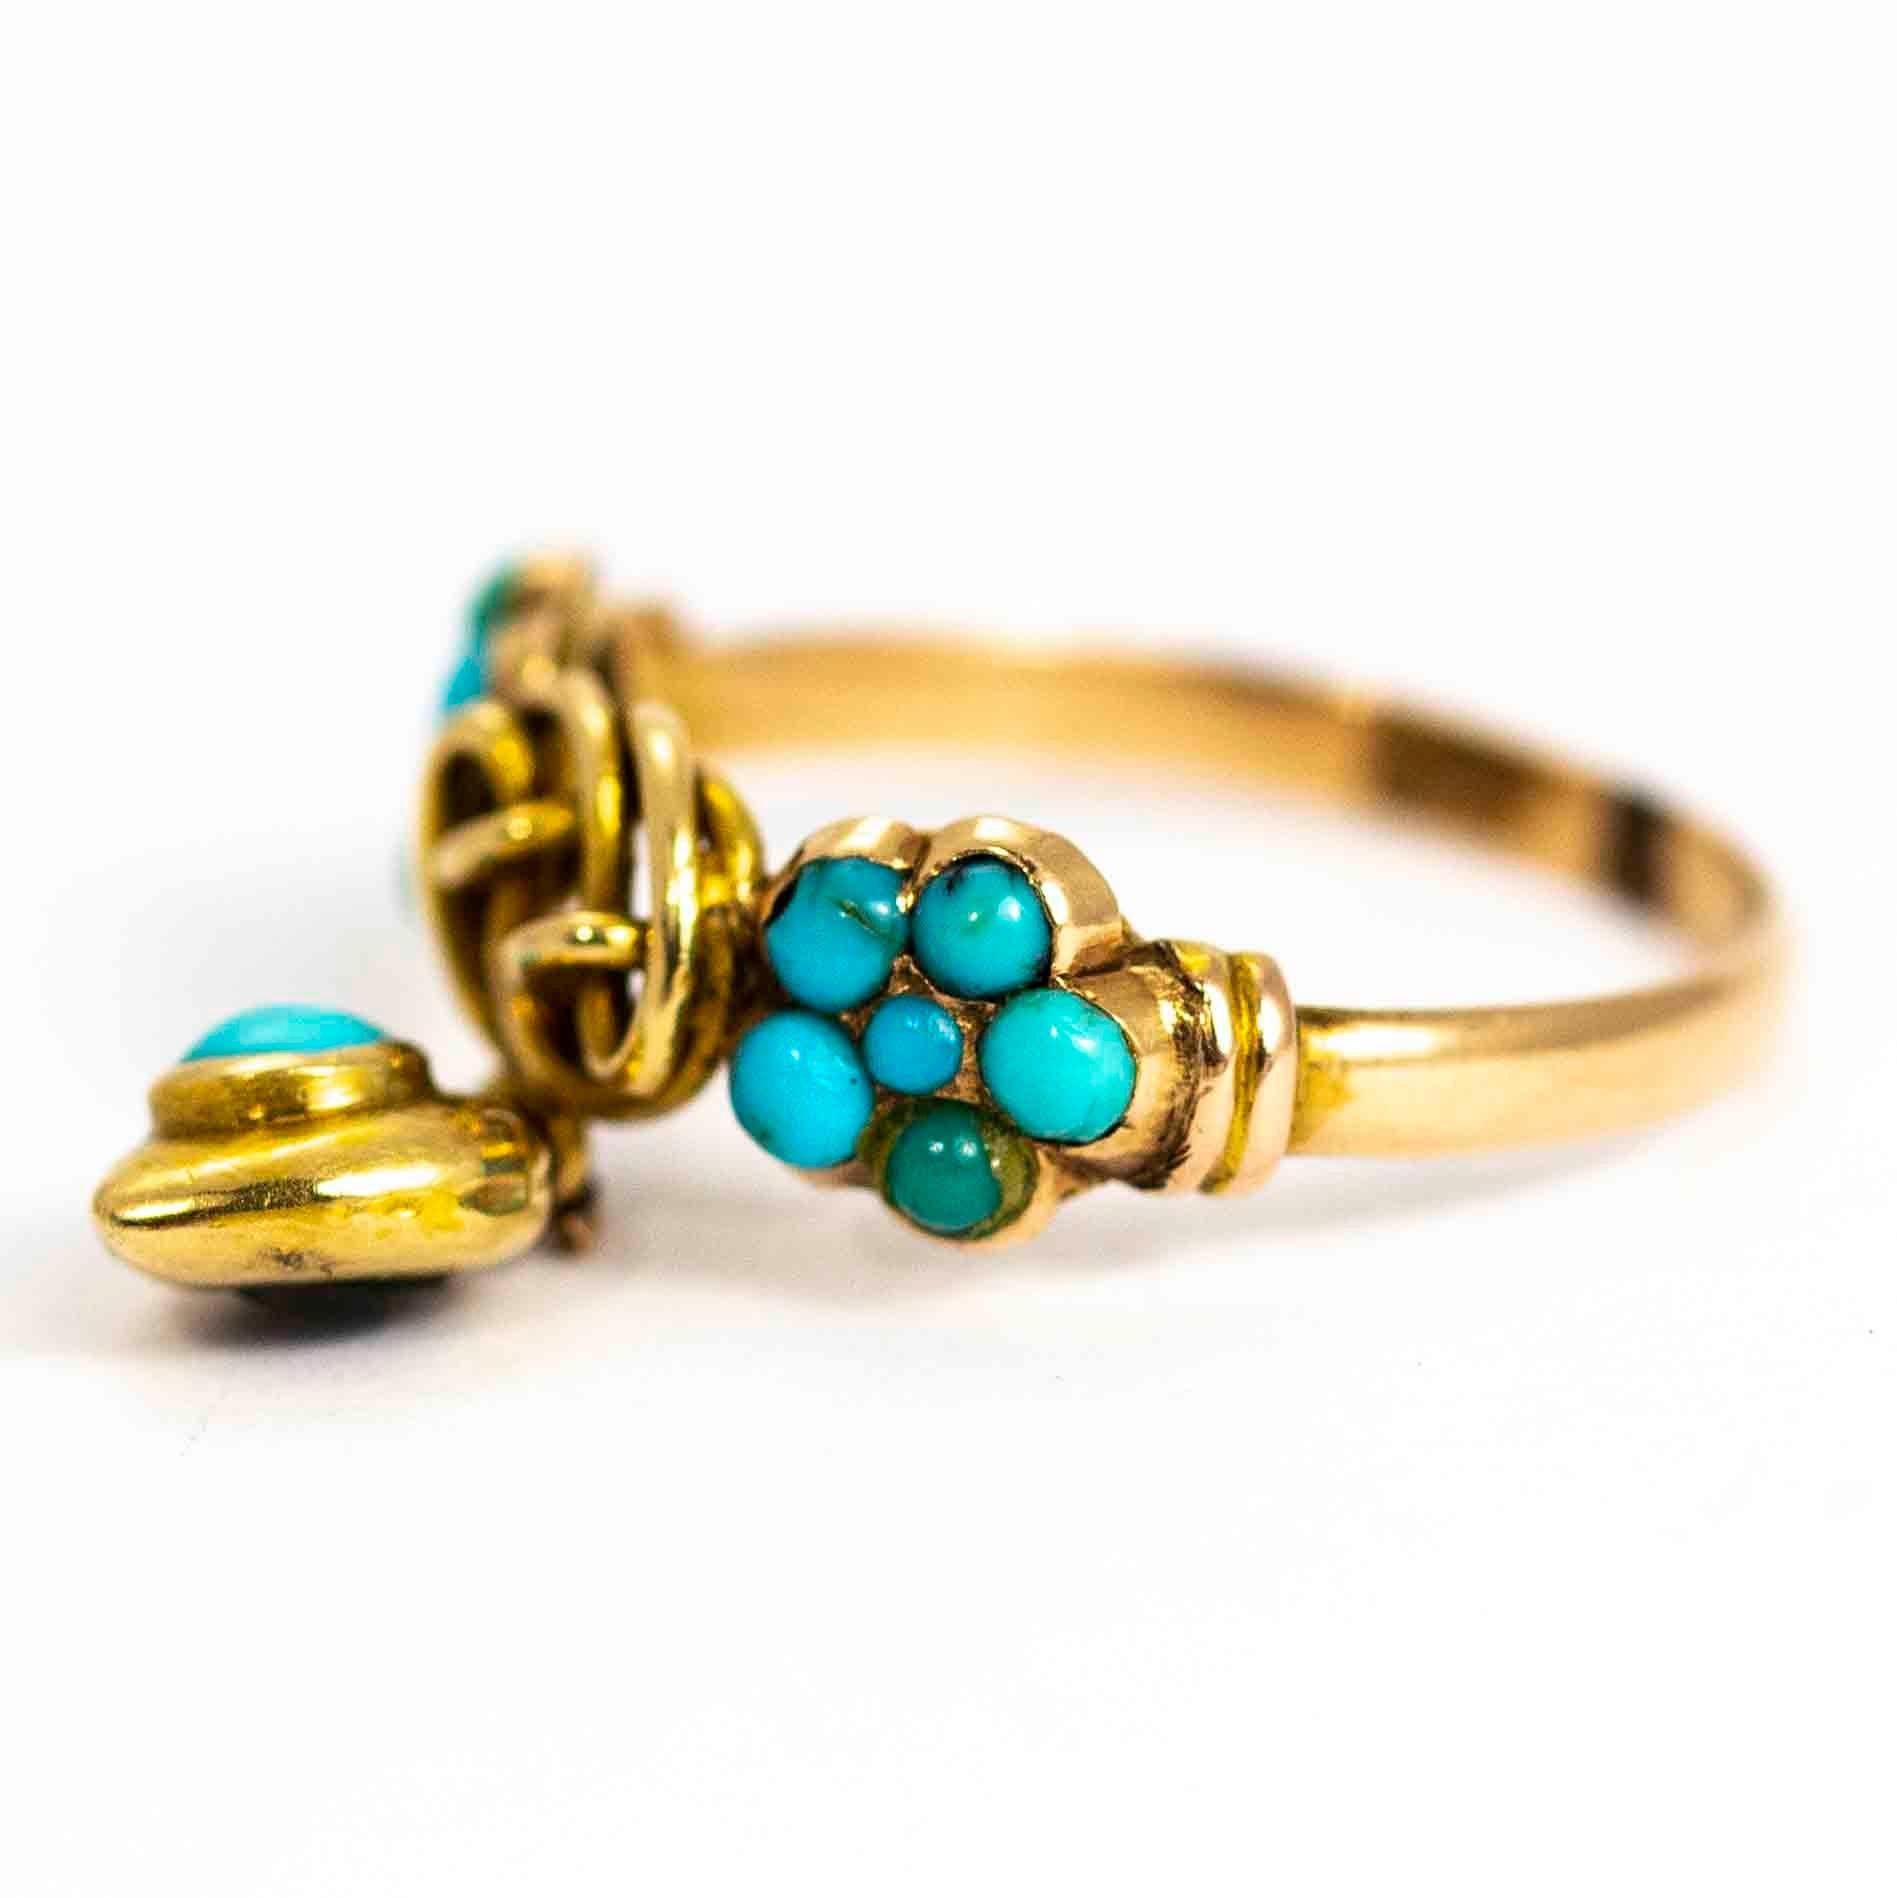 A spectacular vintage ring. The band is set with a pair of beautiful turquoise cabochon clusters flanking stunning gold lover's knot. Hanging from this is a exquisite heart pendant set with a large turquoise cabochon. The heart has a glazed locket